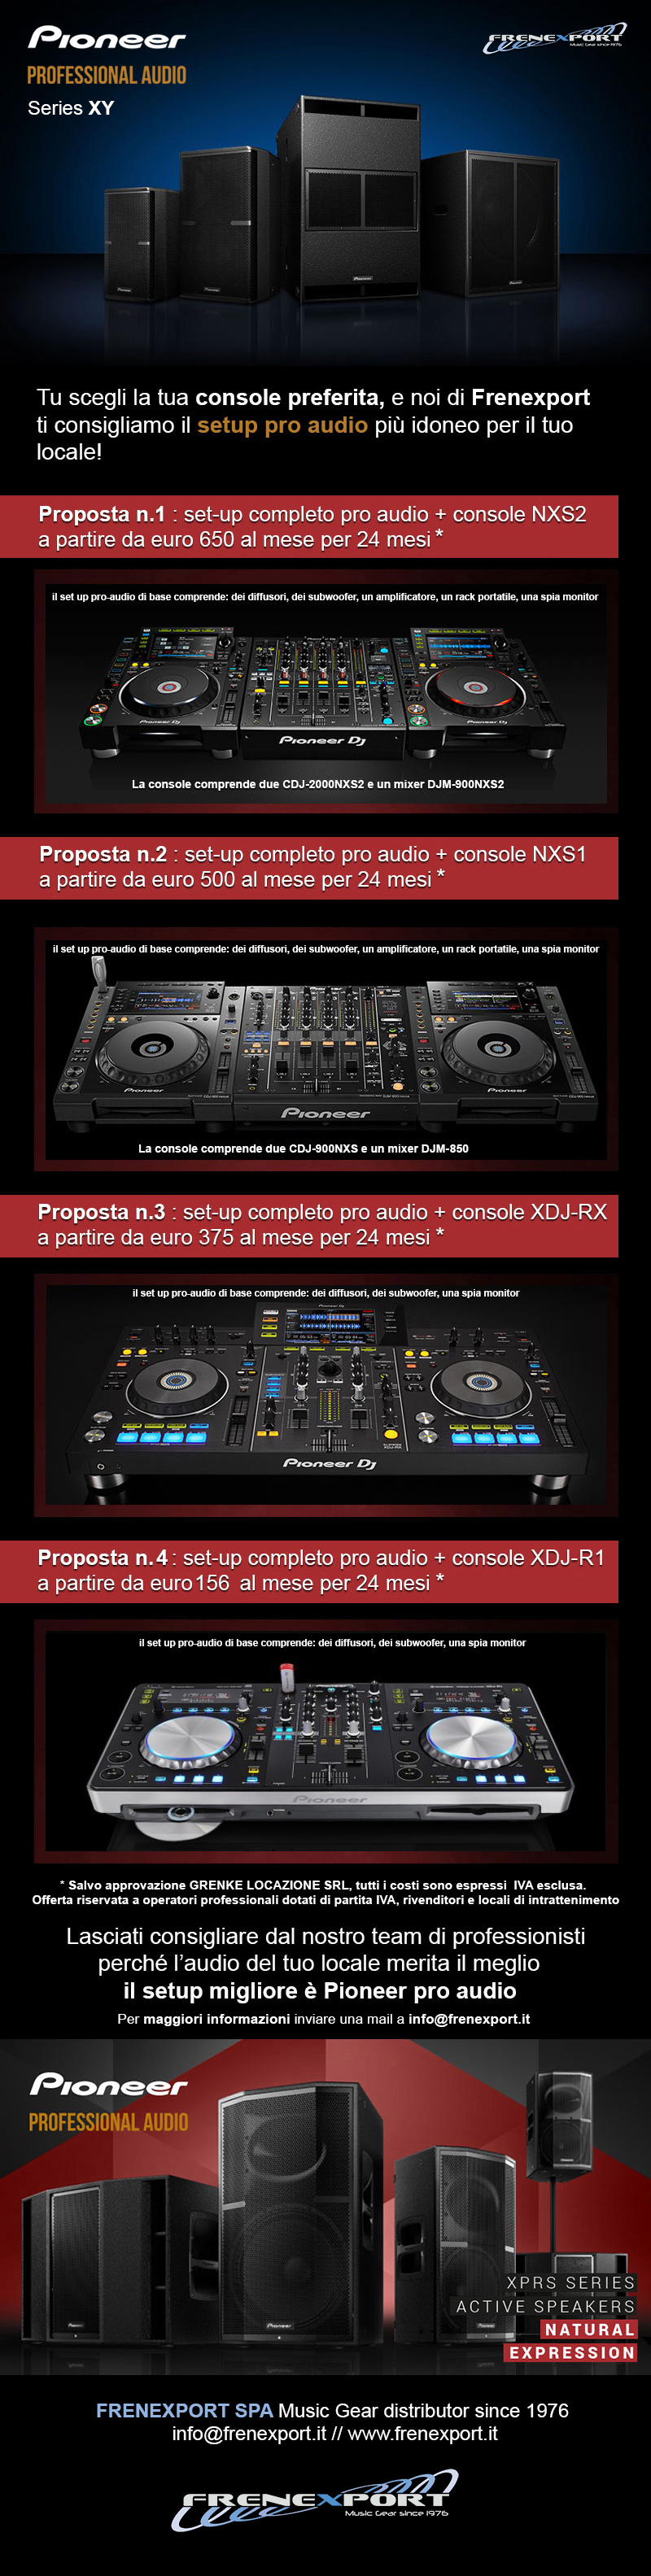 official-newsletter-final-pioneerproaudio-clubtelevision-tv